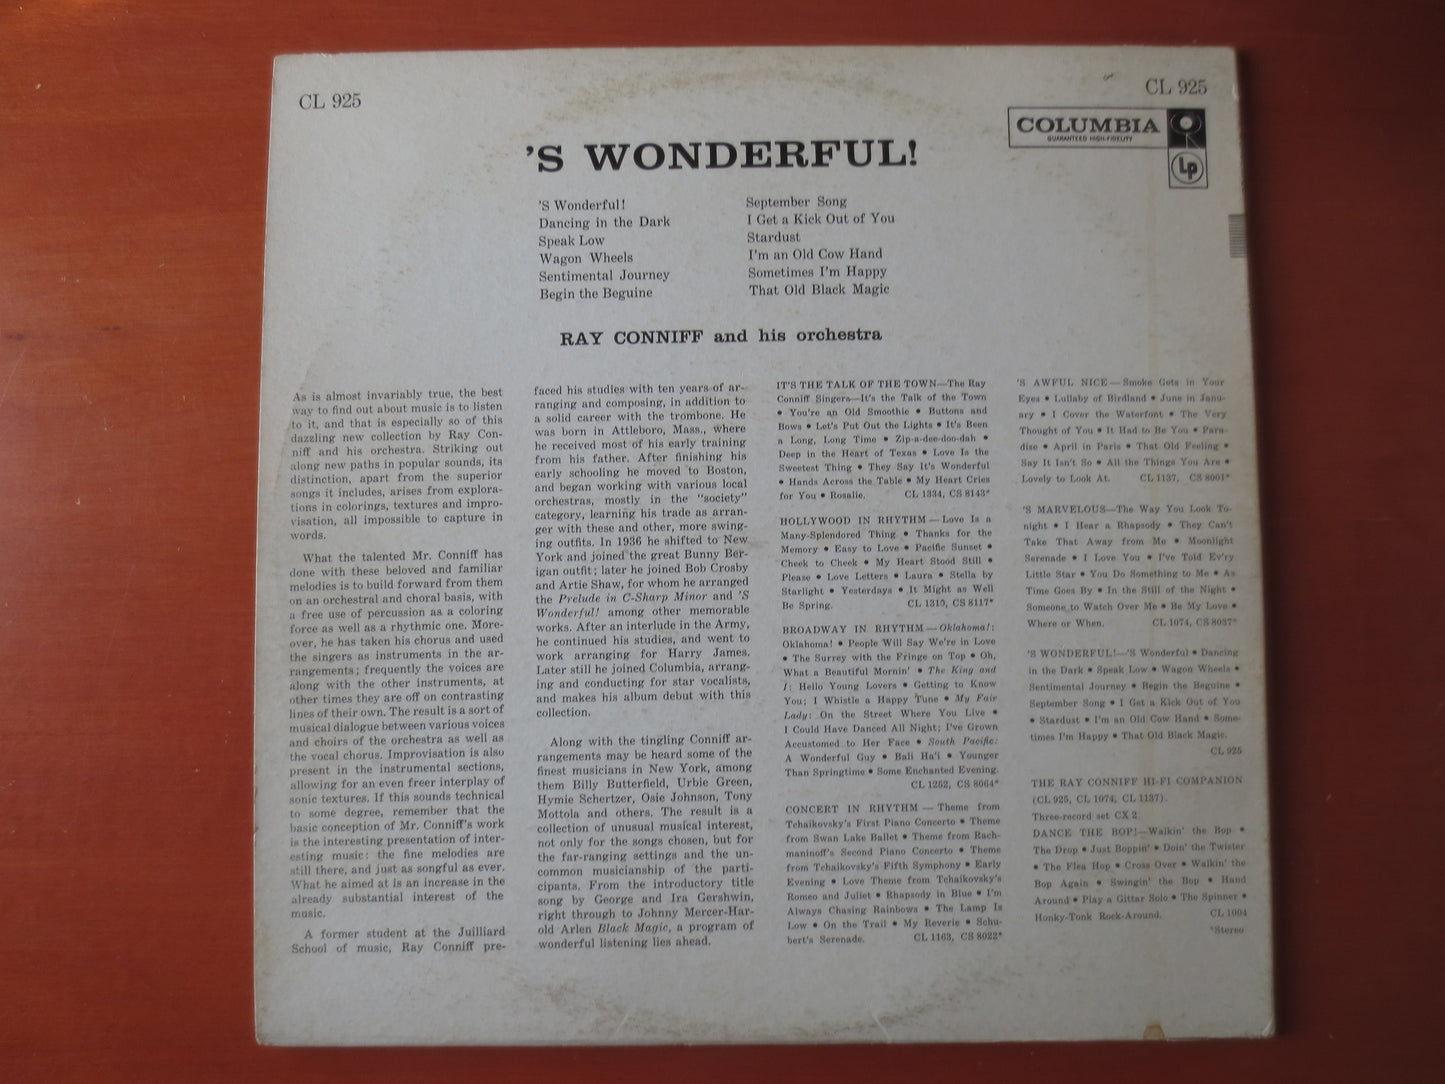 RAY CONNIFF, WONDERFUL, Ray Conniff Records, Ray Conniff Albums, Ray Conniff Music, Jazz Albums, Vinyl Record, 1956 Record